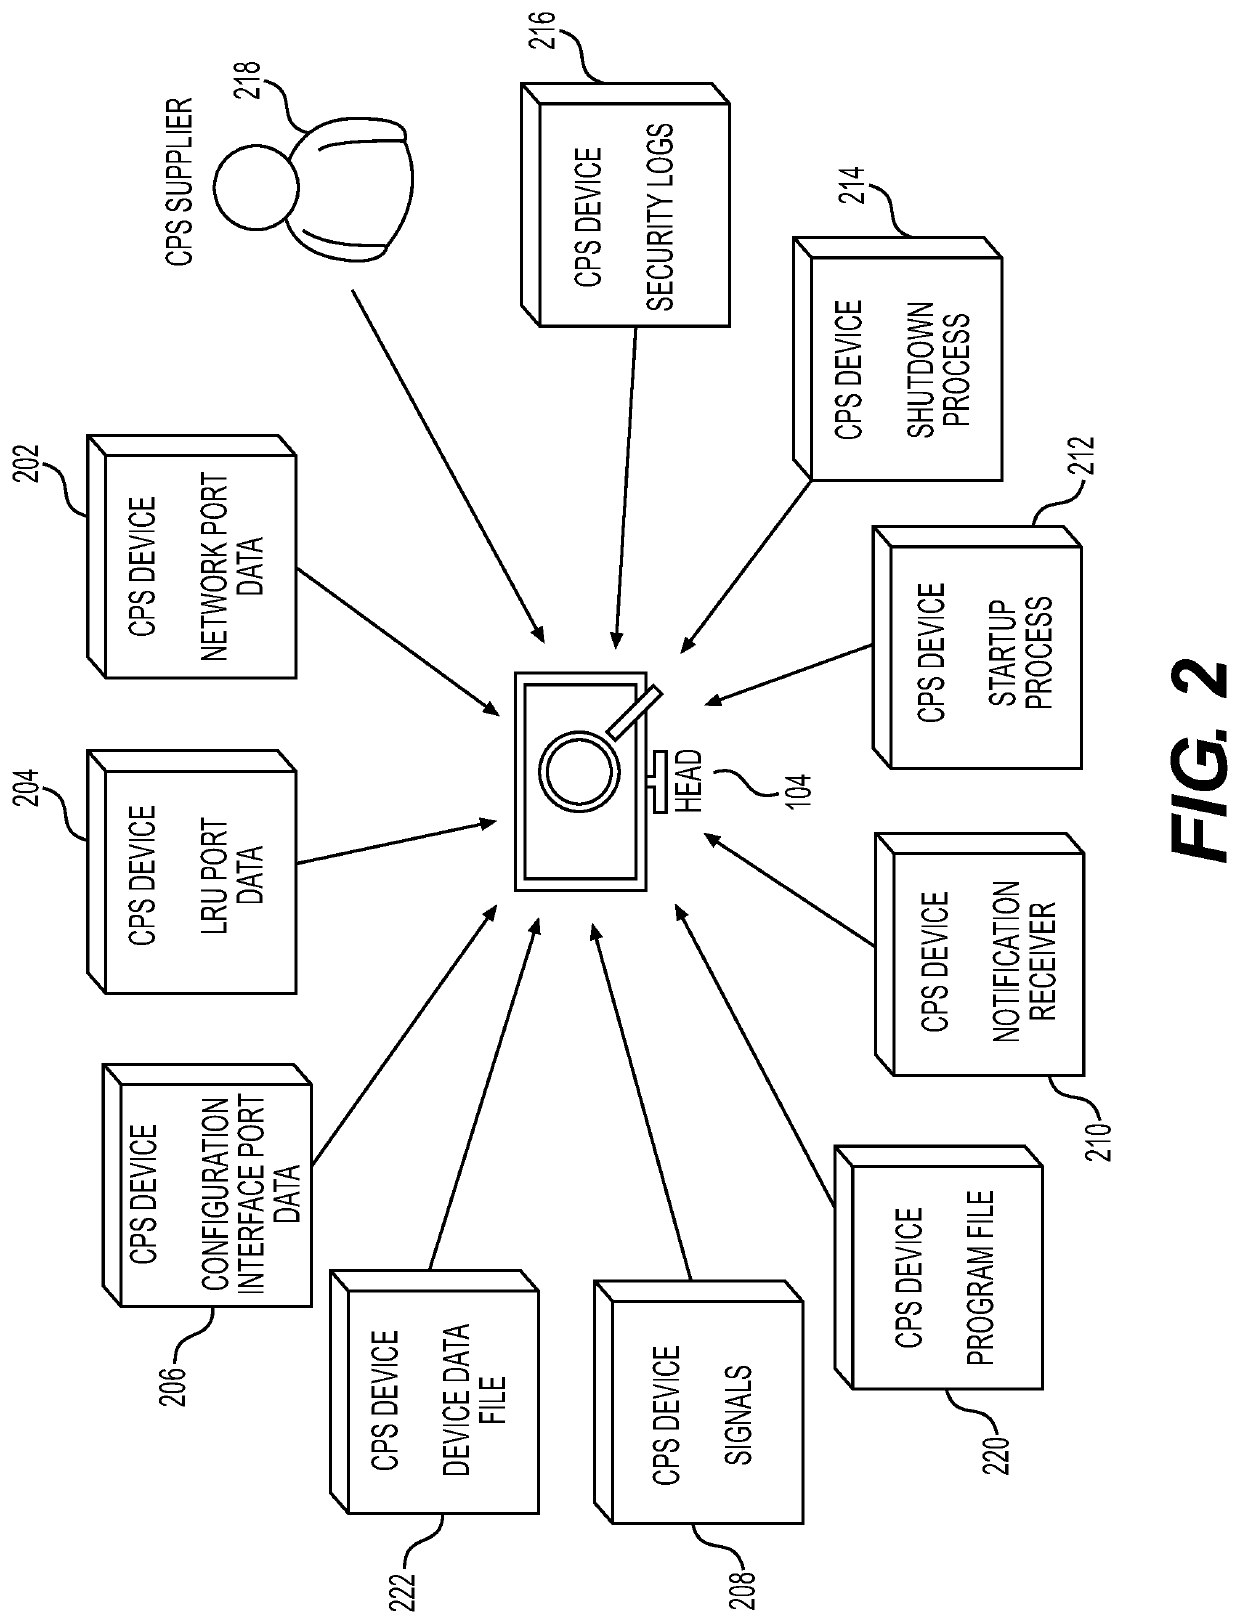 Systems and methods for embedded anomalies detector for cyber-physical systems